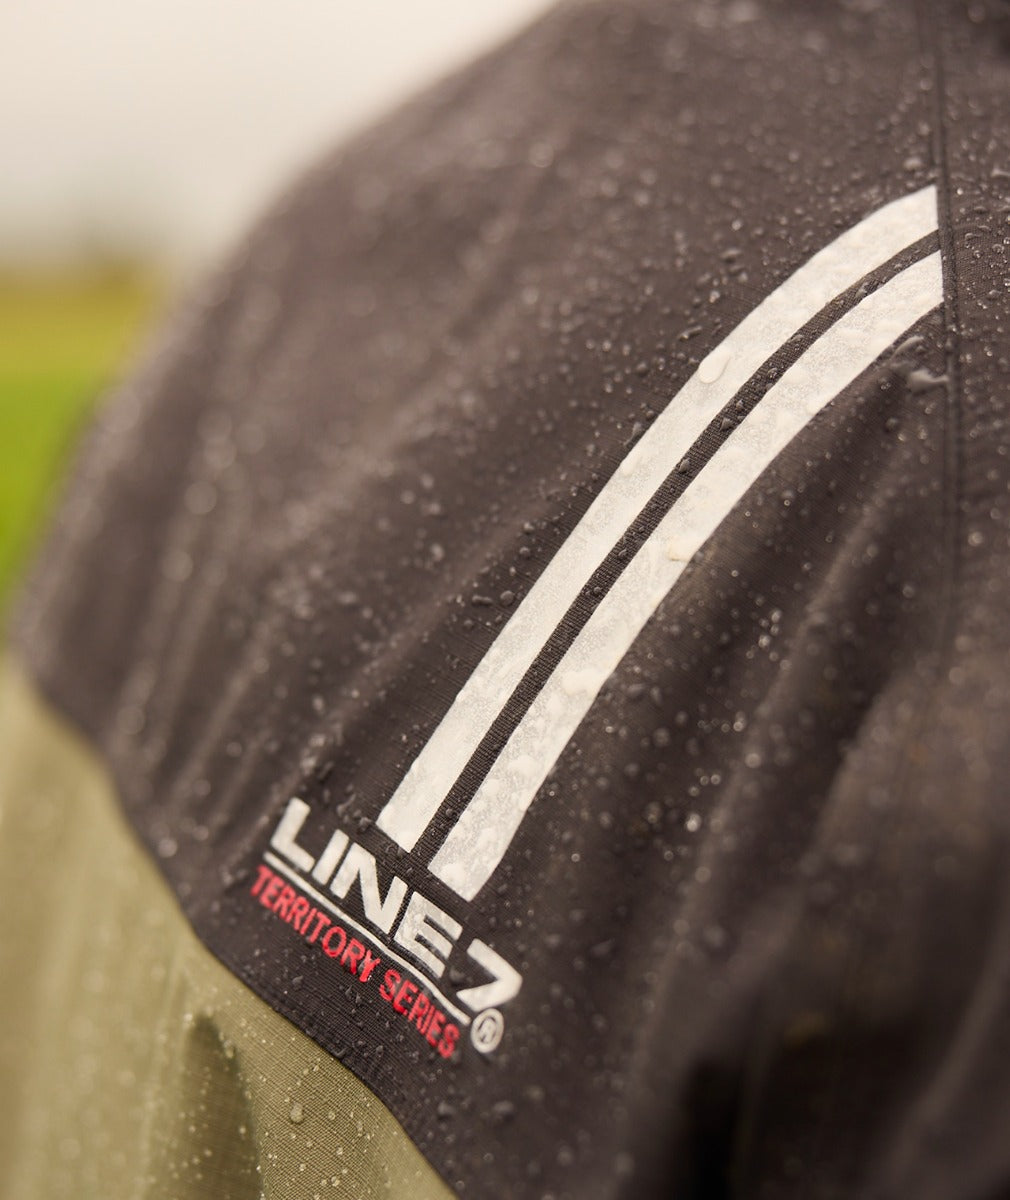 
                  
                    Farming waterproofs, agricultural clothing brands, agricultural waterproof clothing
                  
                